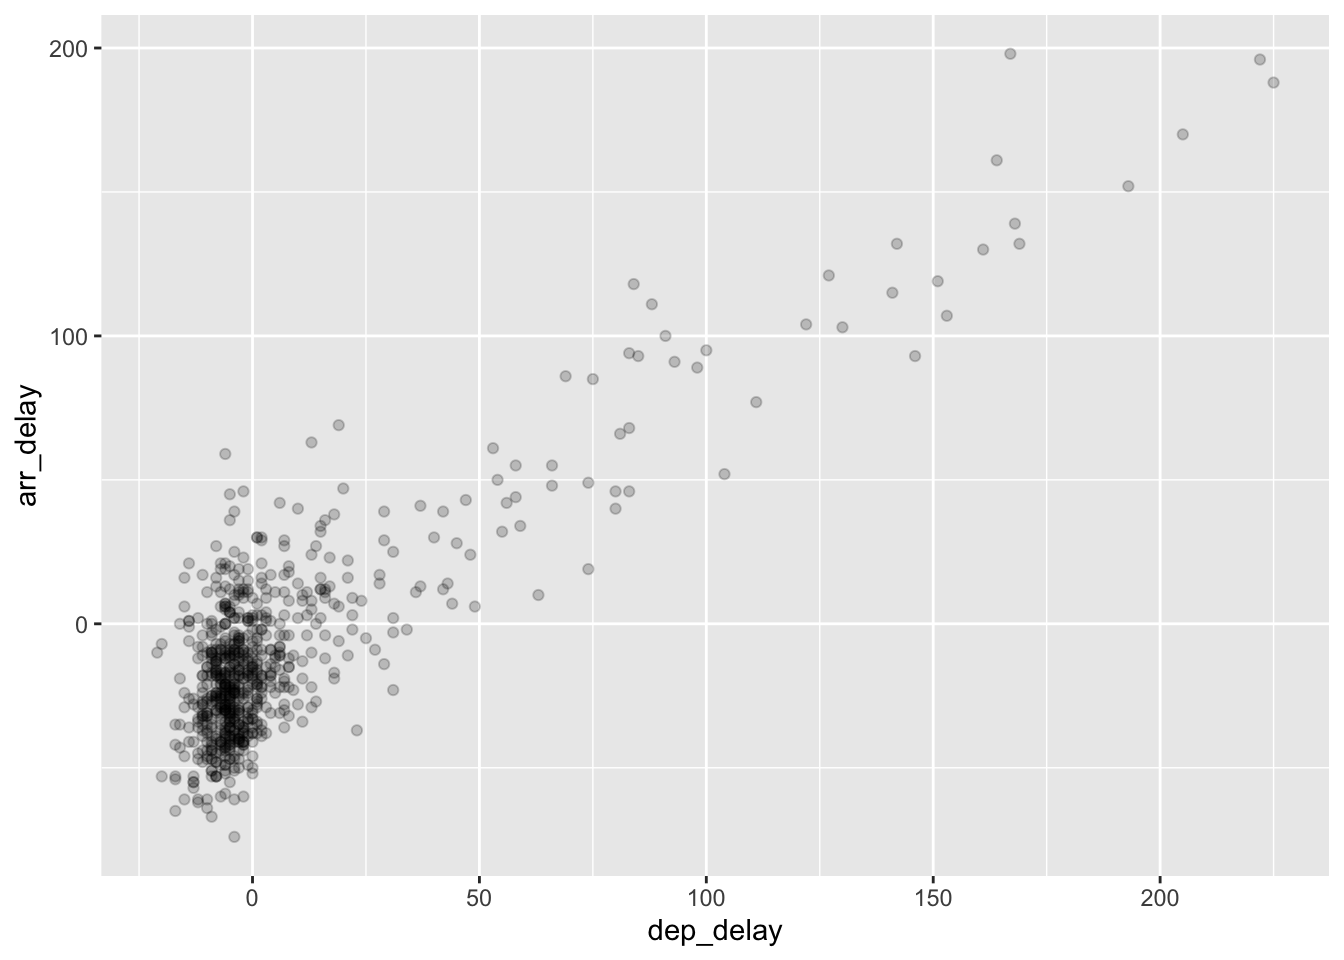 Arrival vs. departure delays scatterplot with alpha = 0.2.